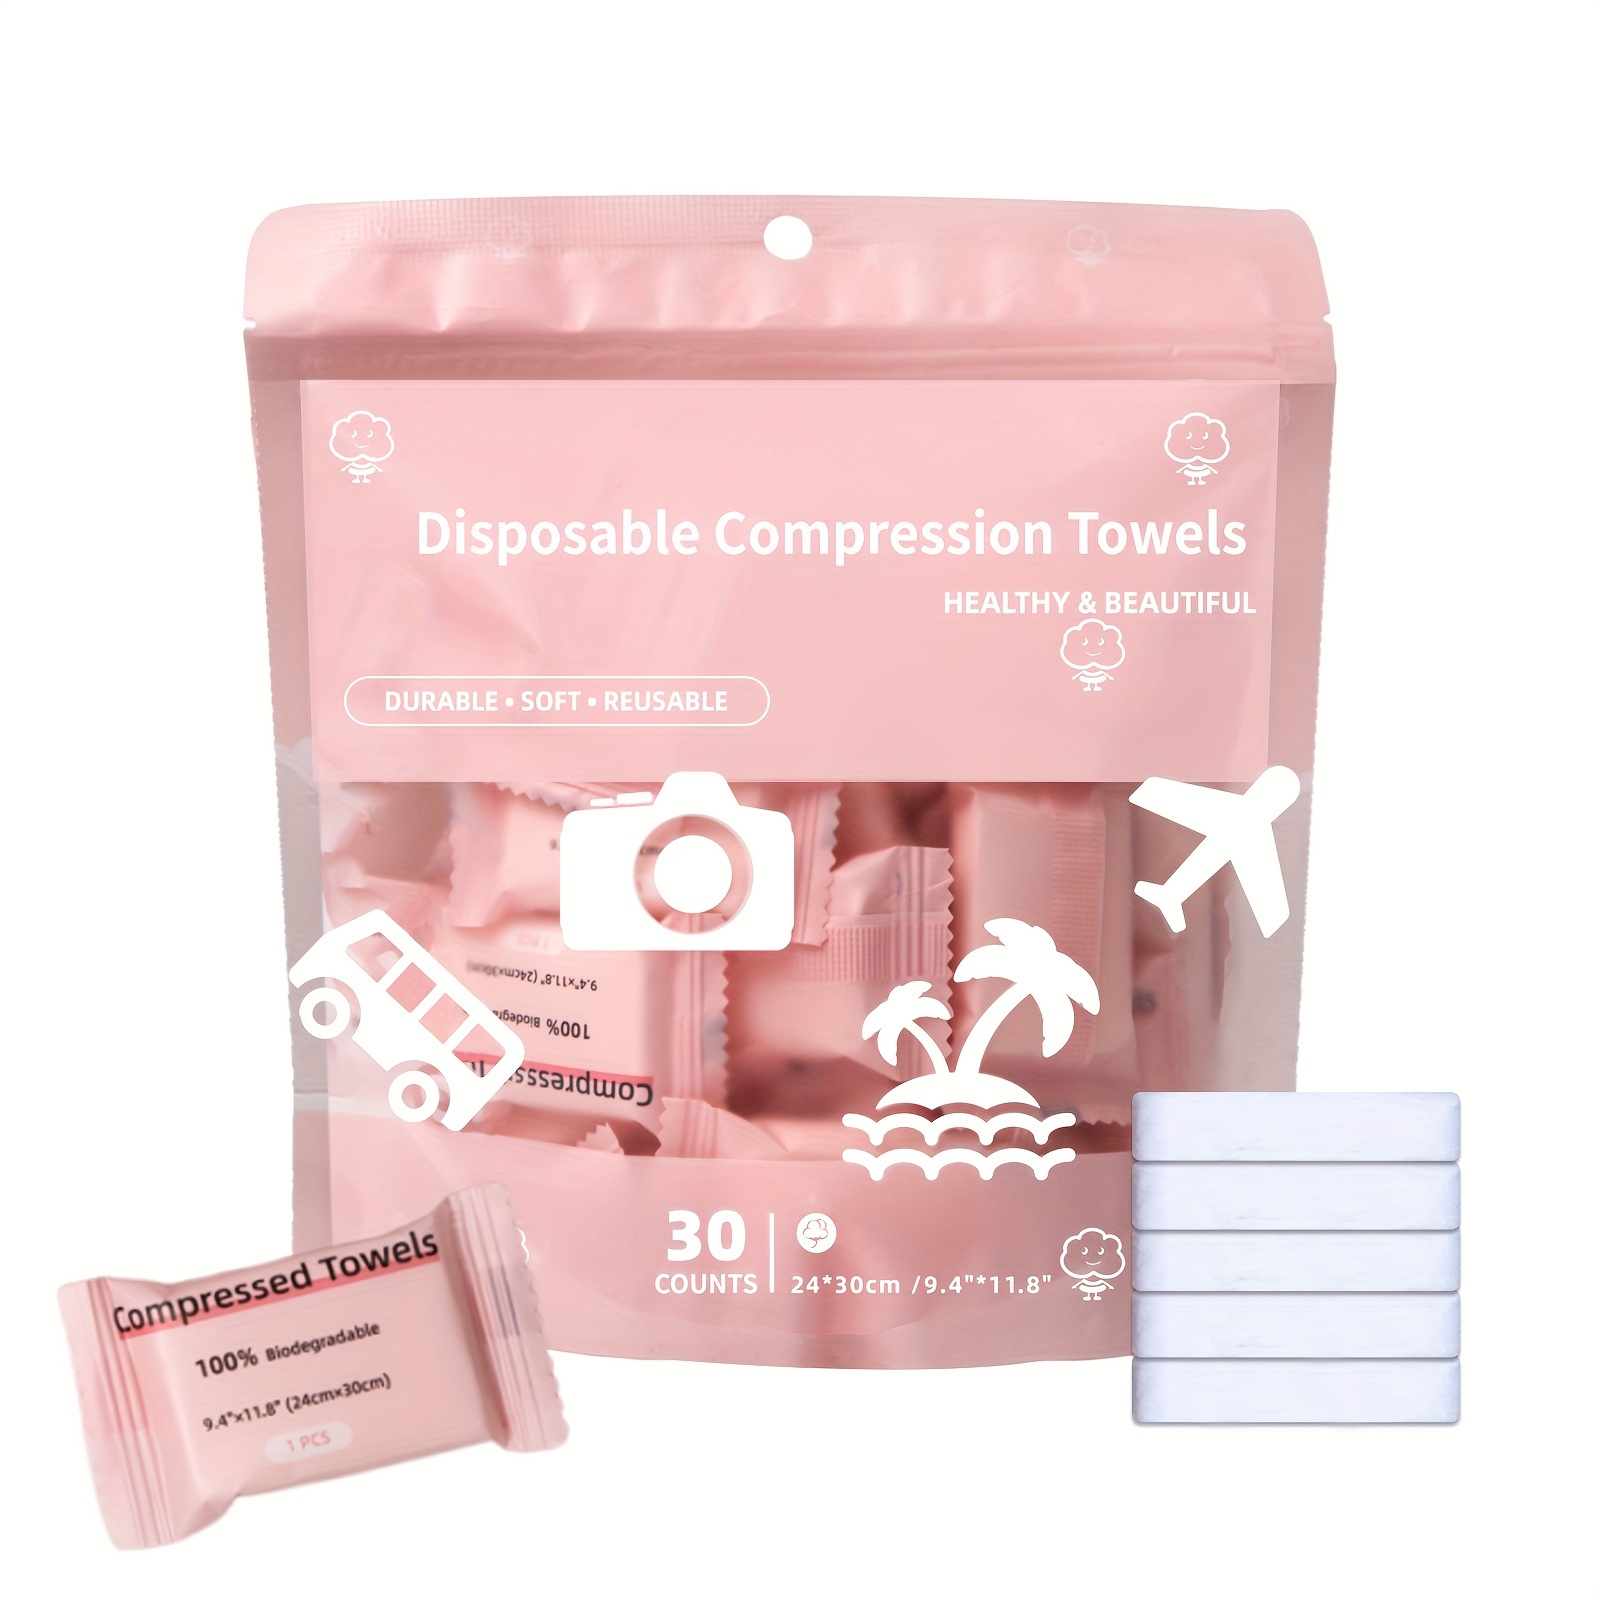 

30pcs Compressed Towels, Portable Disposable Towel, Thickened And Enlarged Disposable Face Towel, Suitable For Traveling Camping Trip Outdoor Sports And Makeup Basic Cleaning